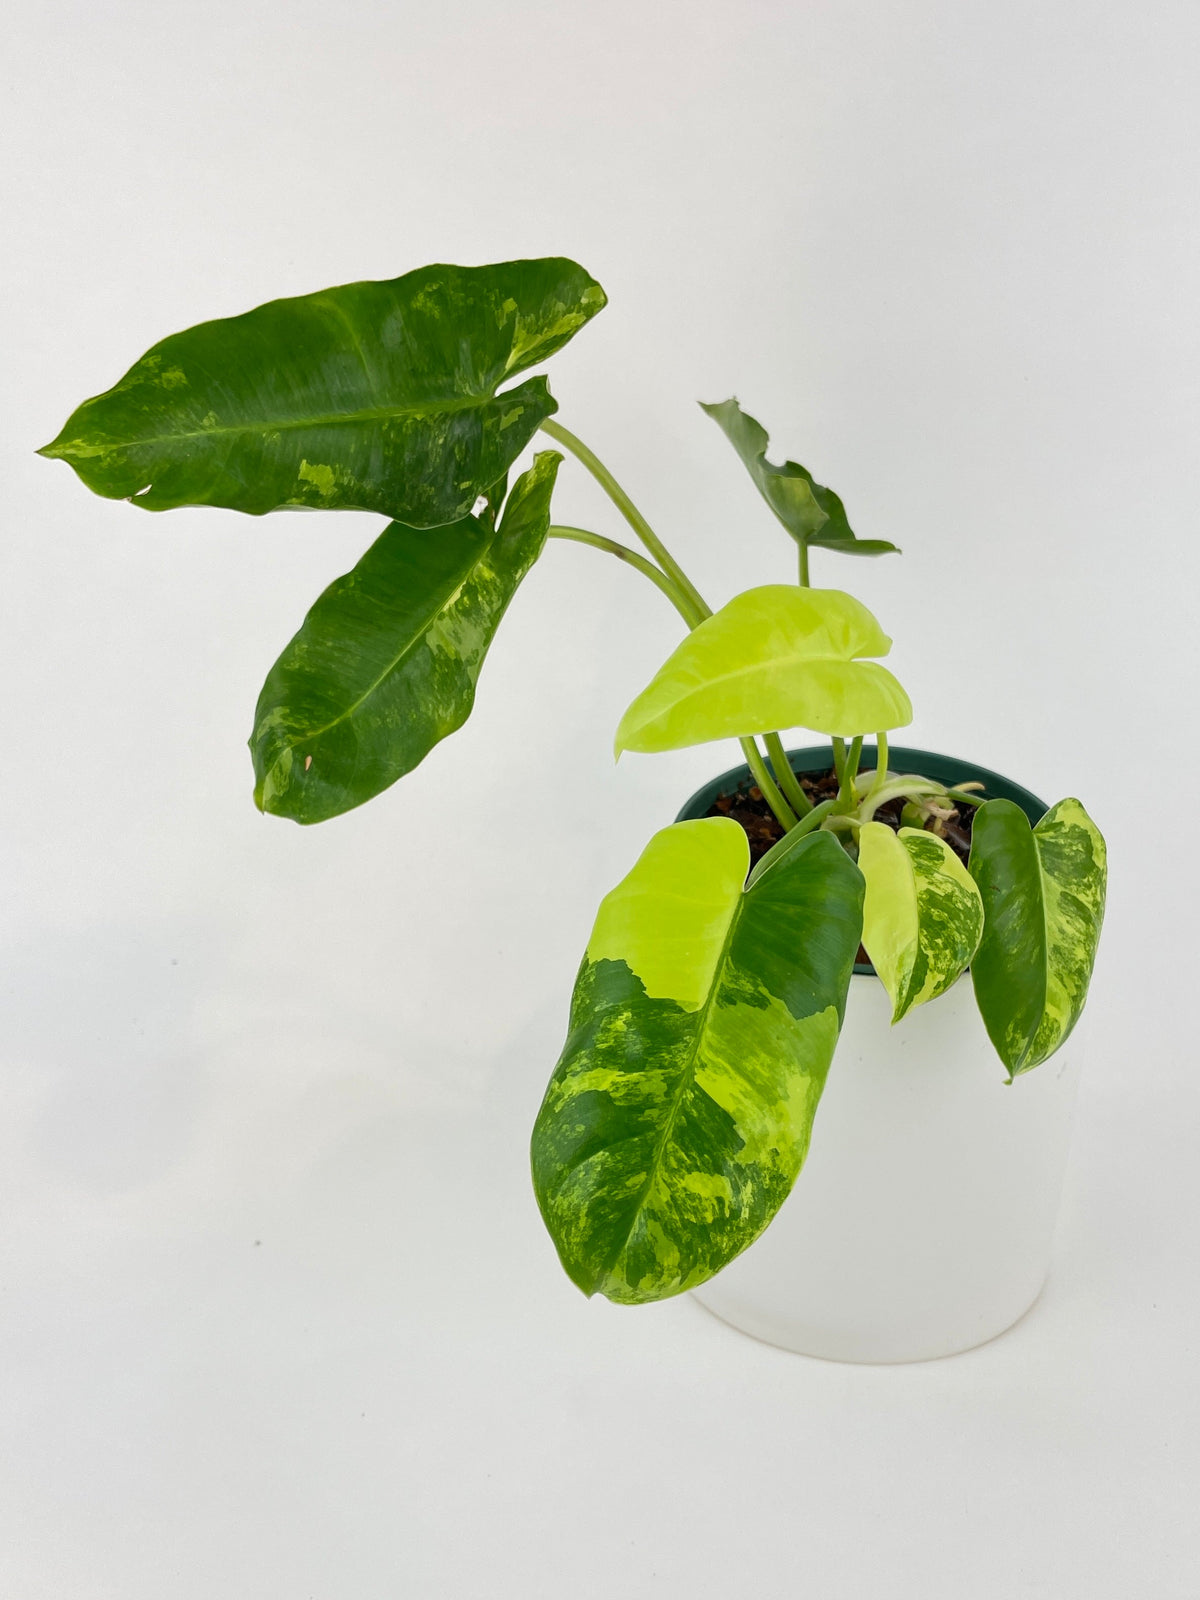 Variegated Philodendron Burle Marx by Bumble Plants